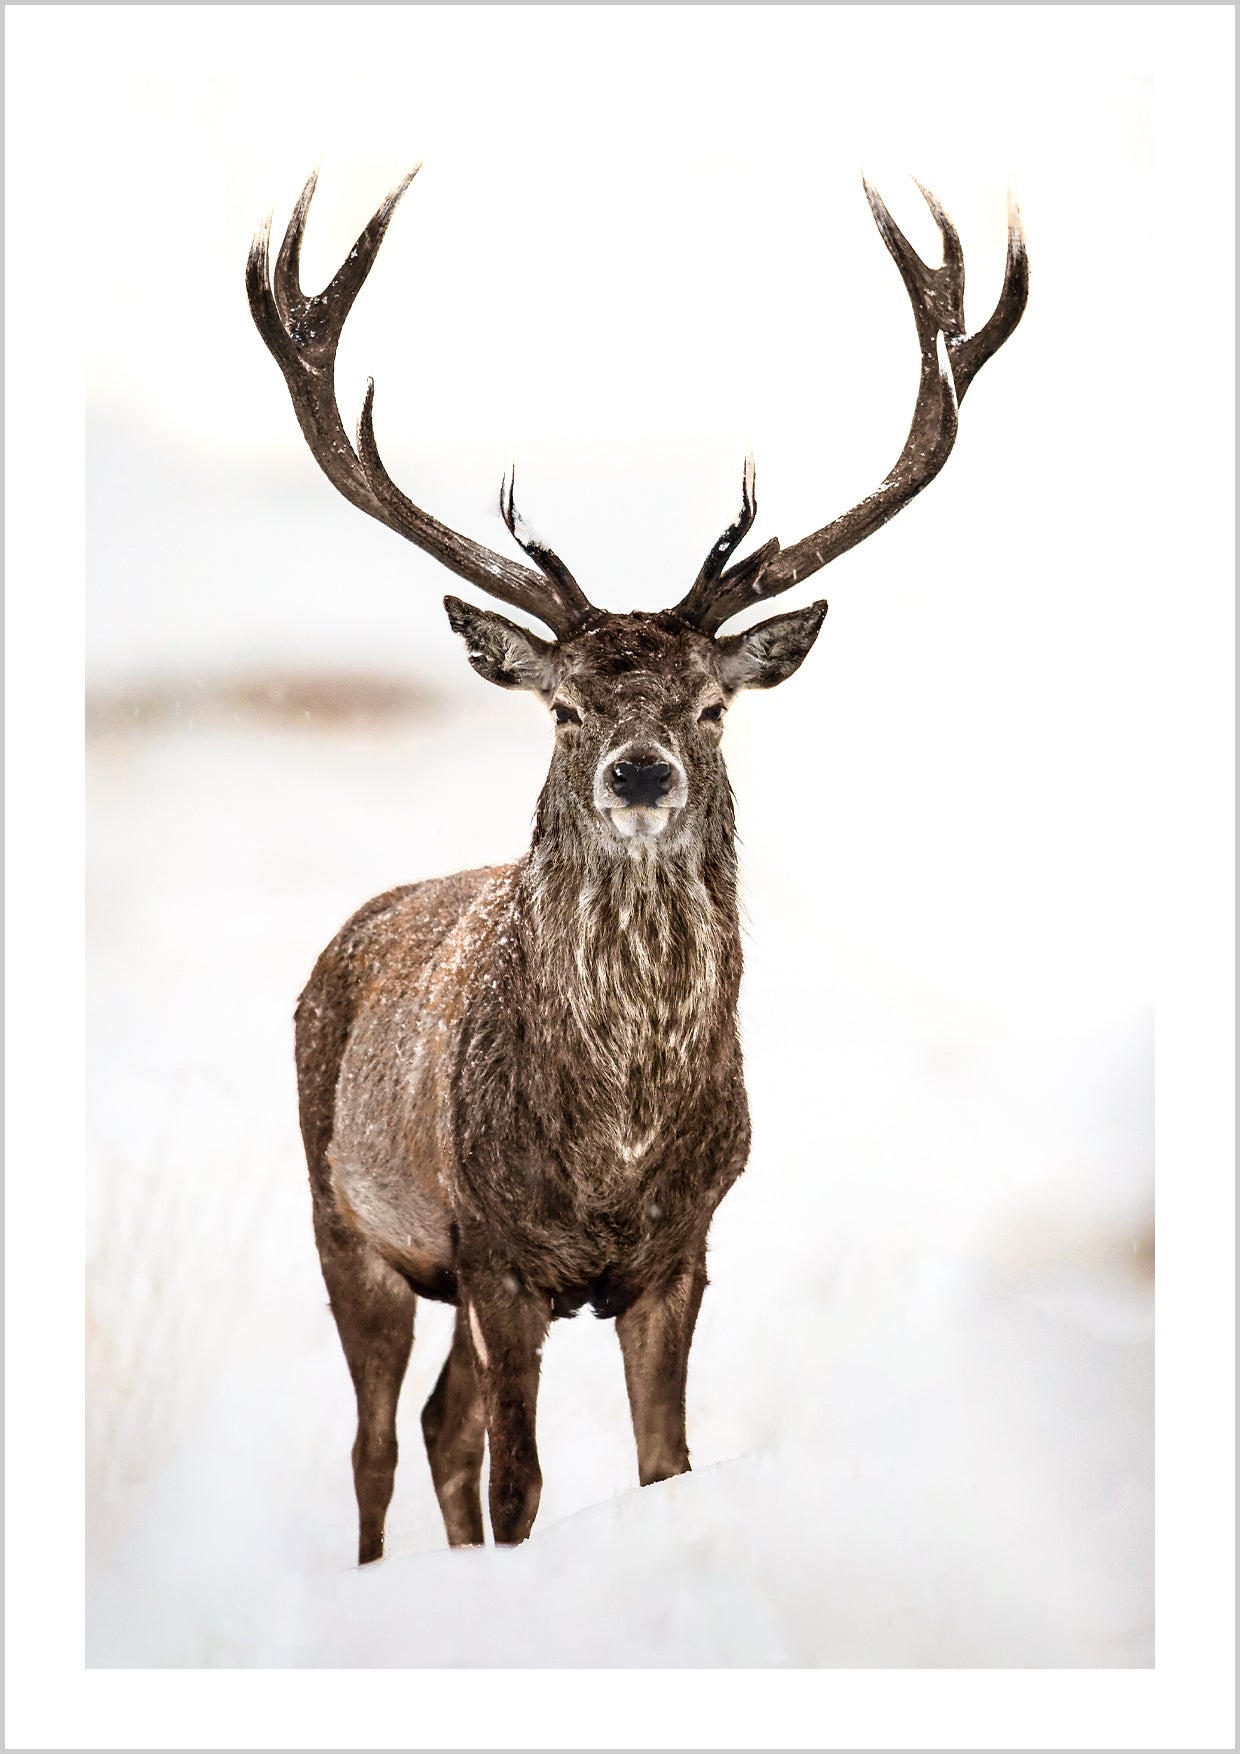 A portrait photograph of a deer stag surrounded by snow